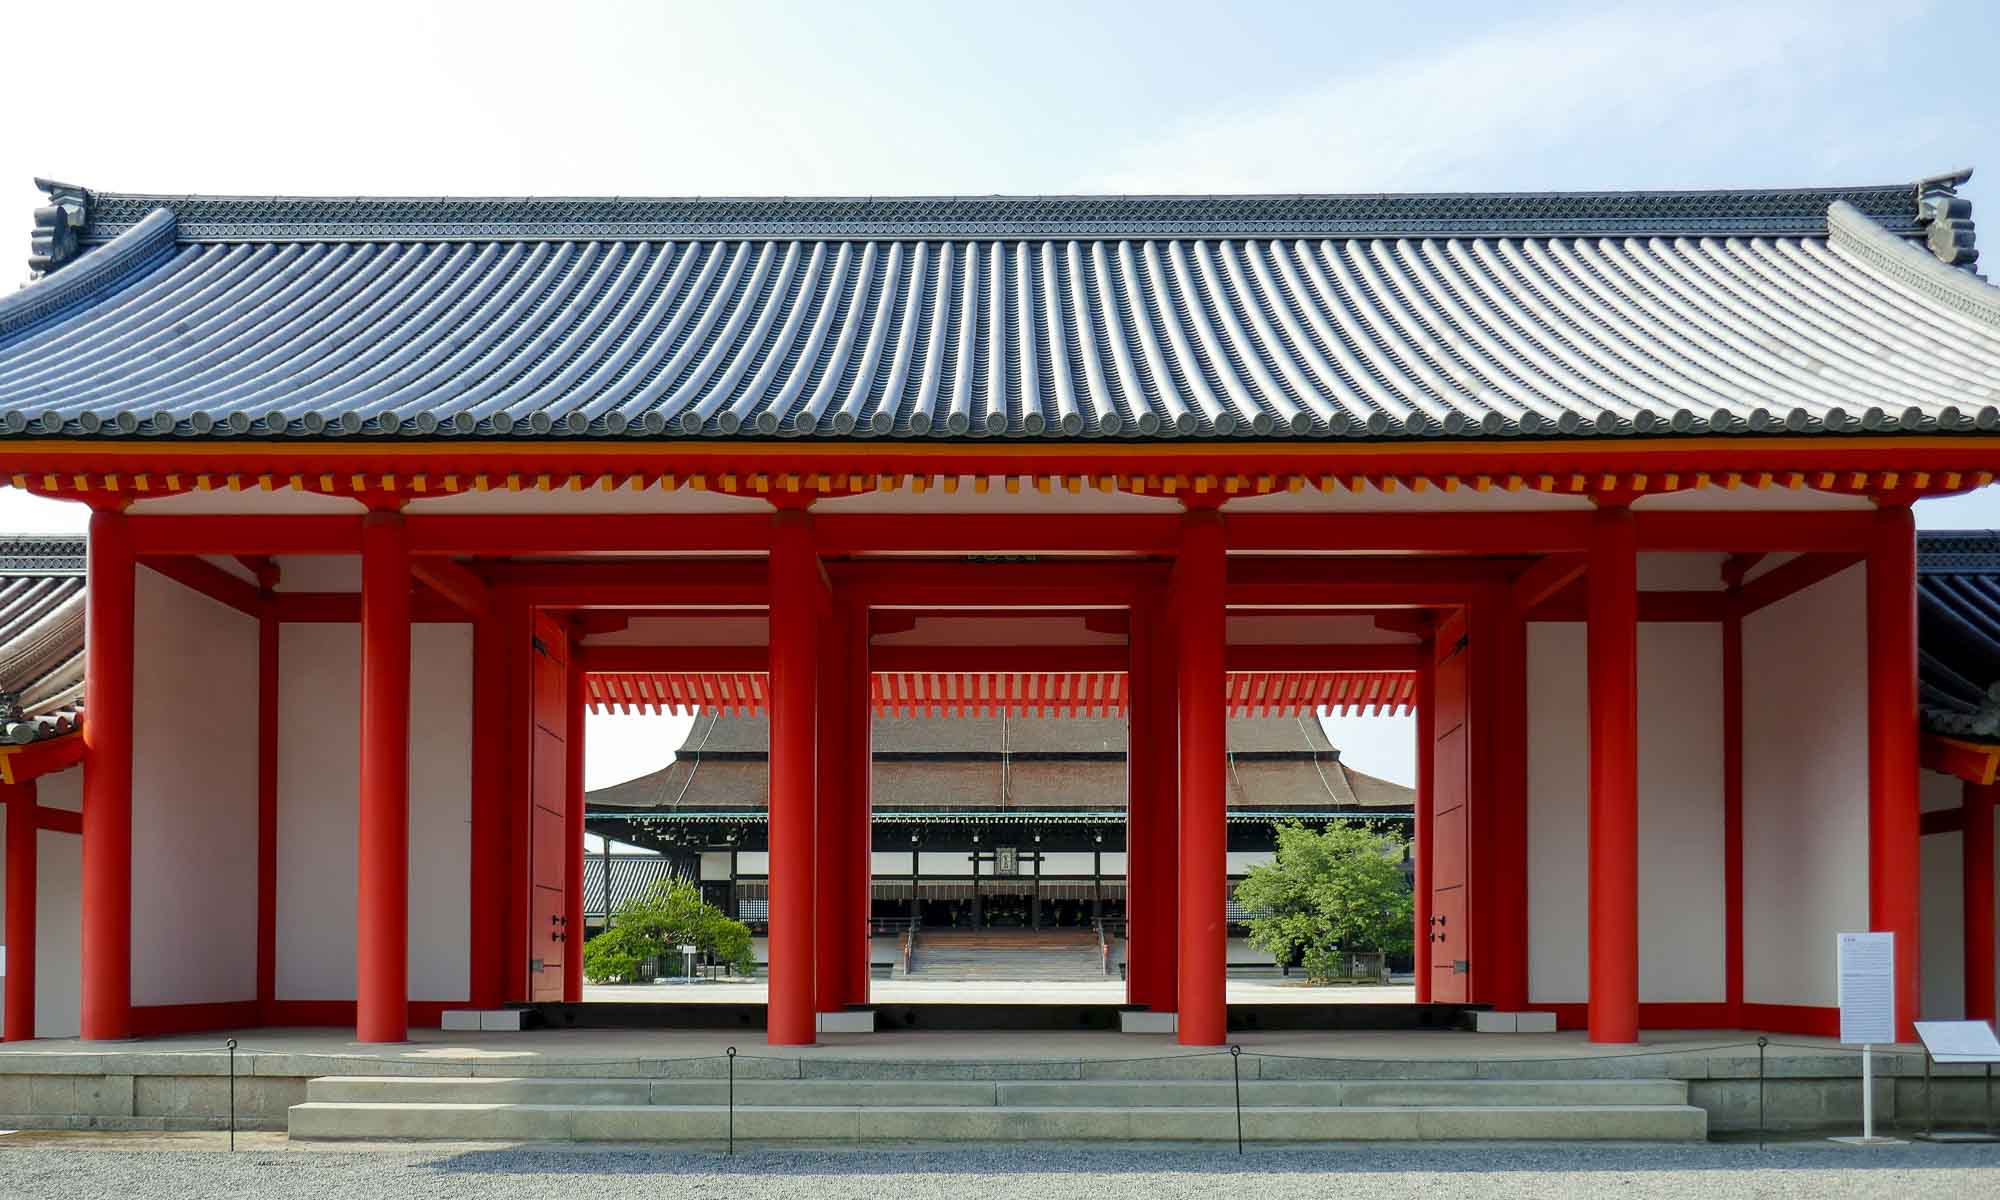 Jomeimon Gate to Shishinden (hall for state ceremonies)